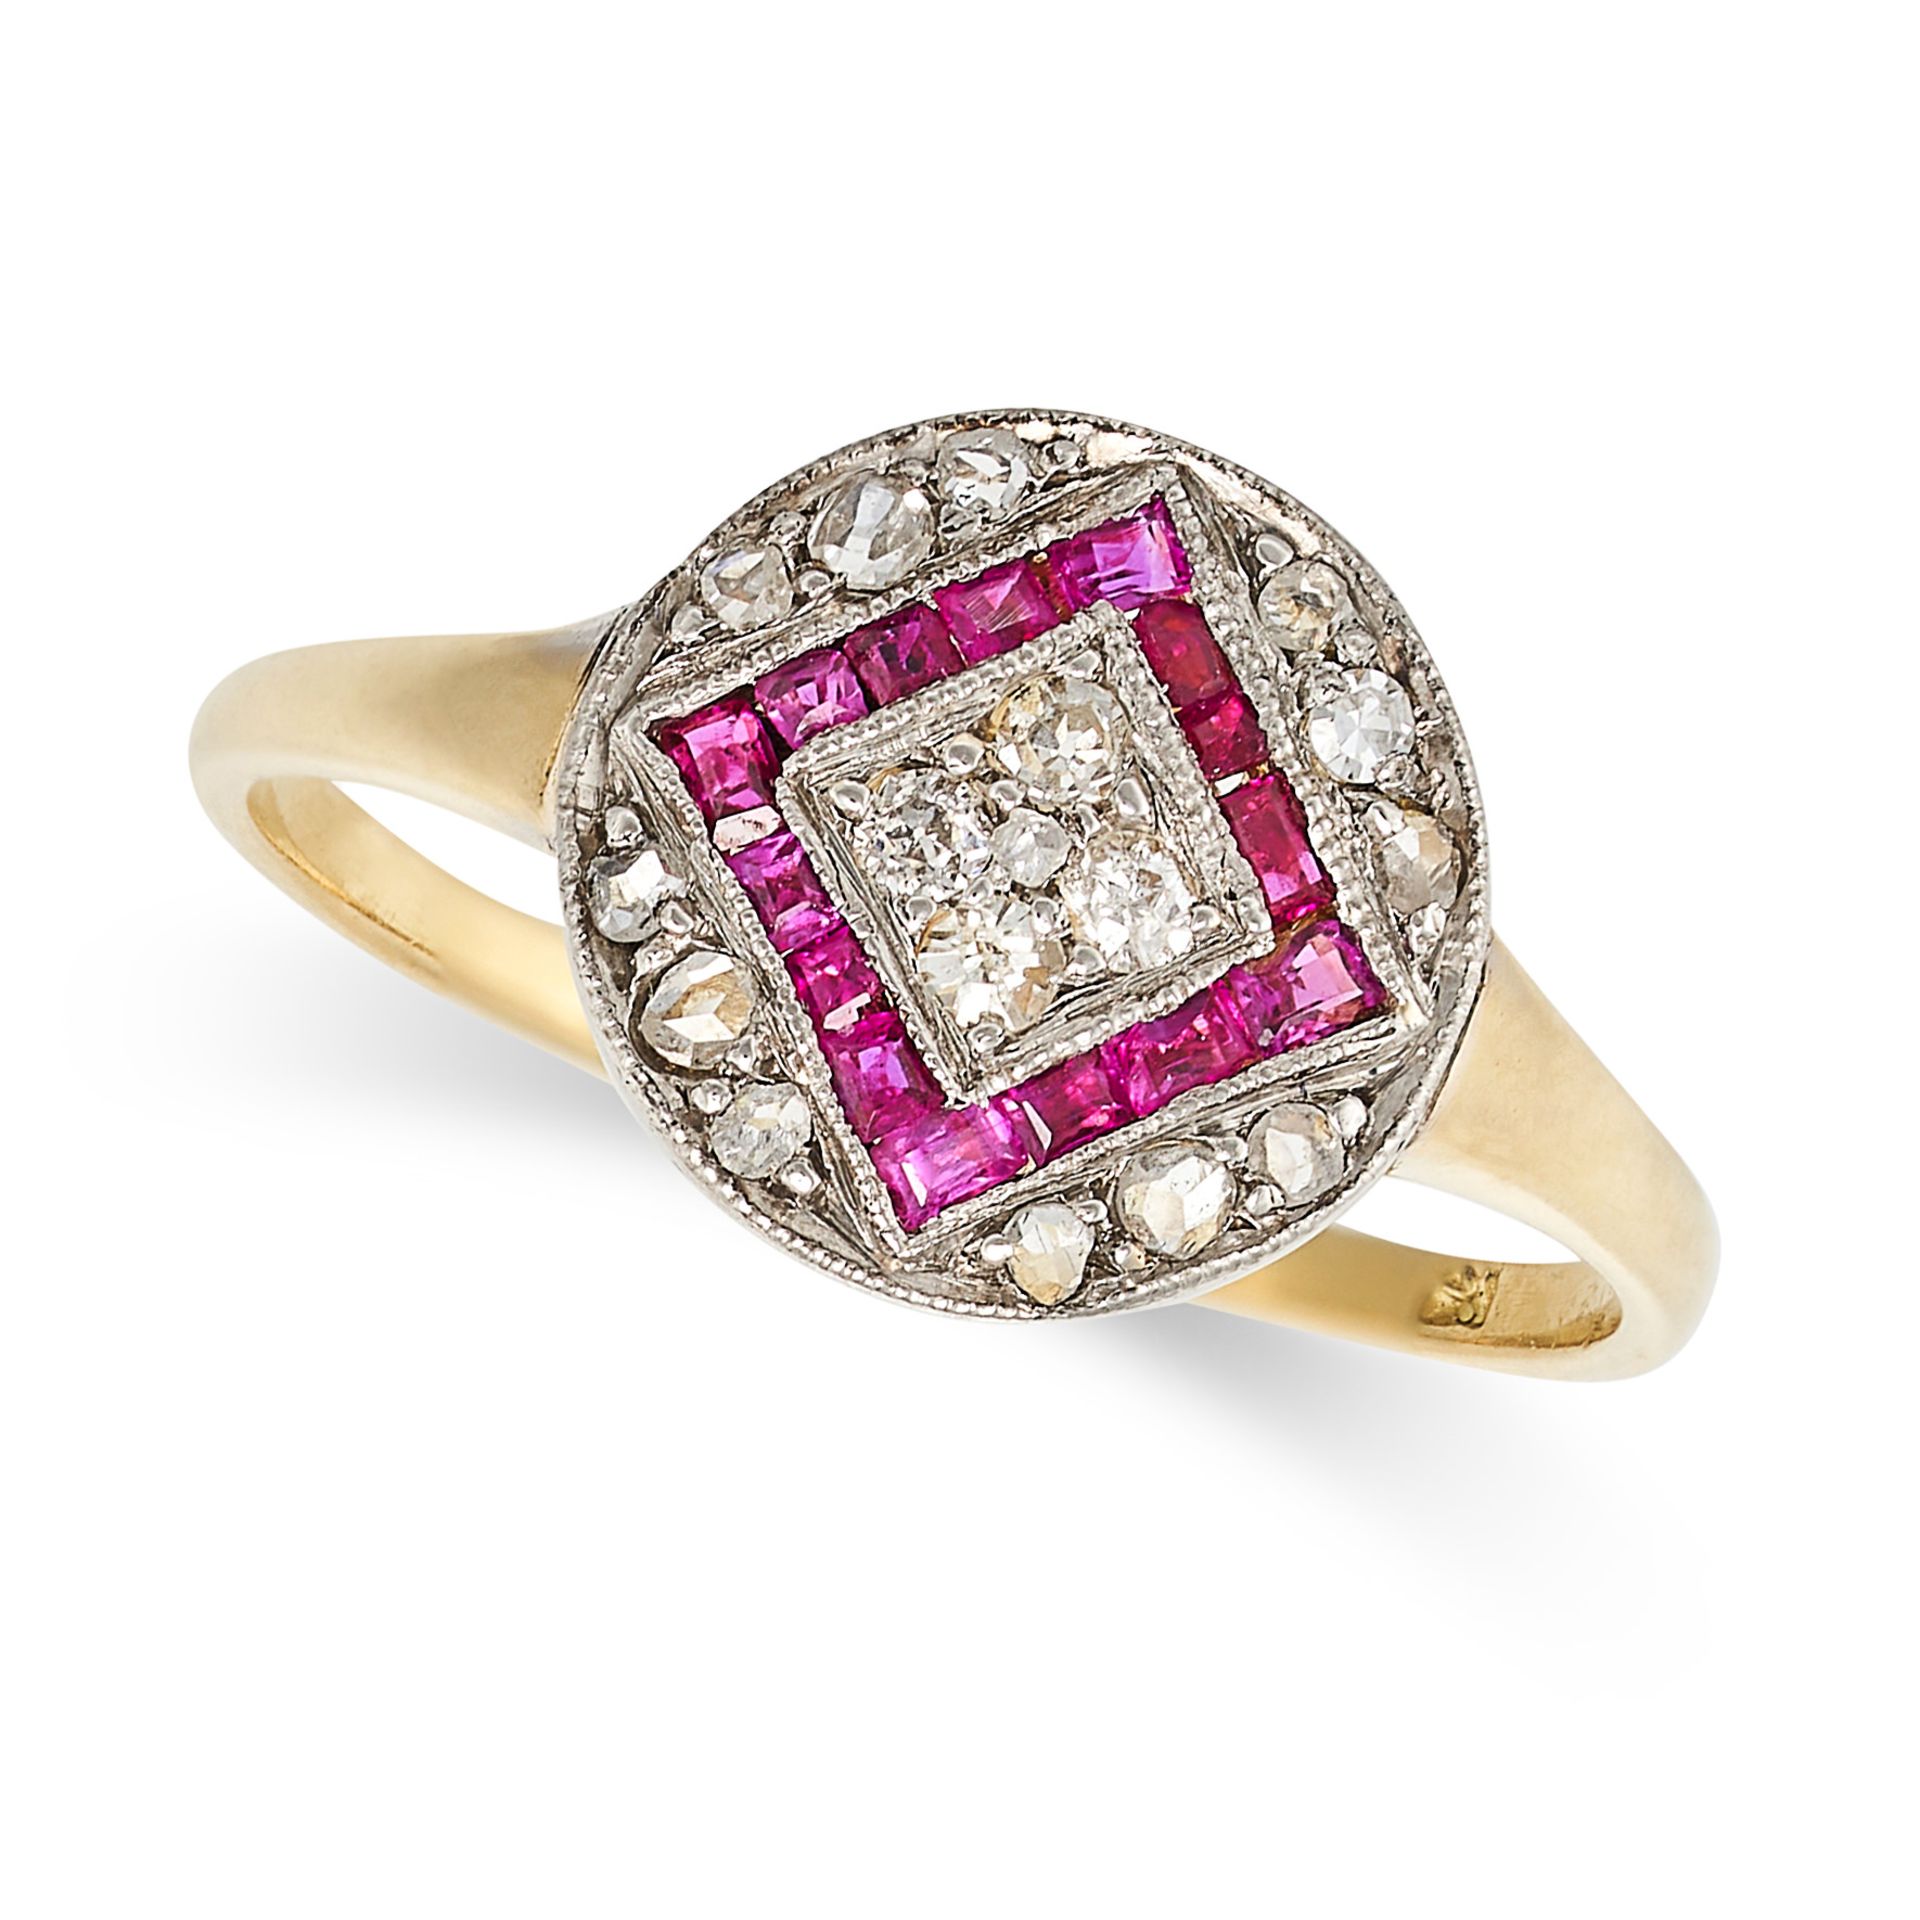 AN ART DECO RUBY AND DIAMOND RING in 18ct yellow gold, the circular face set with a cluster of ol...